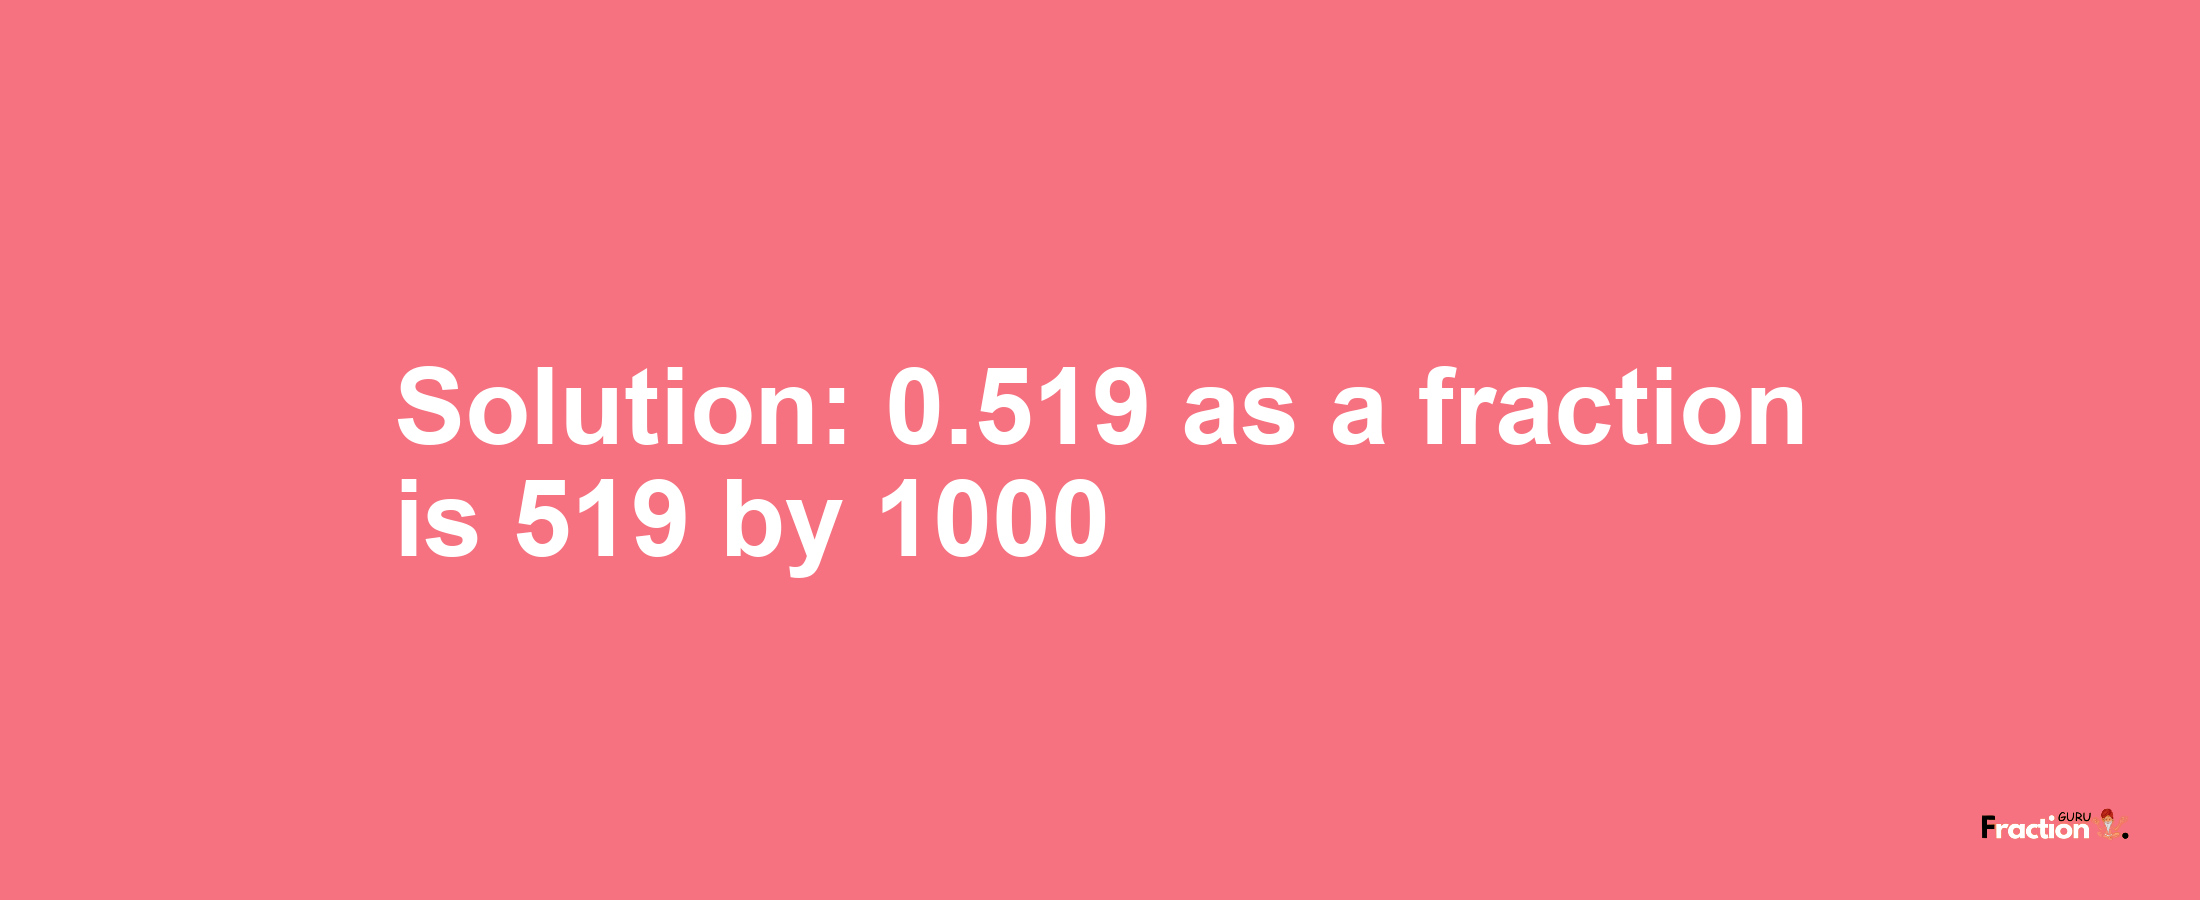 Solution:0.519 as a fraction is 519/1000